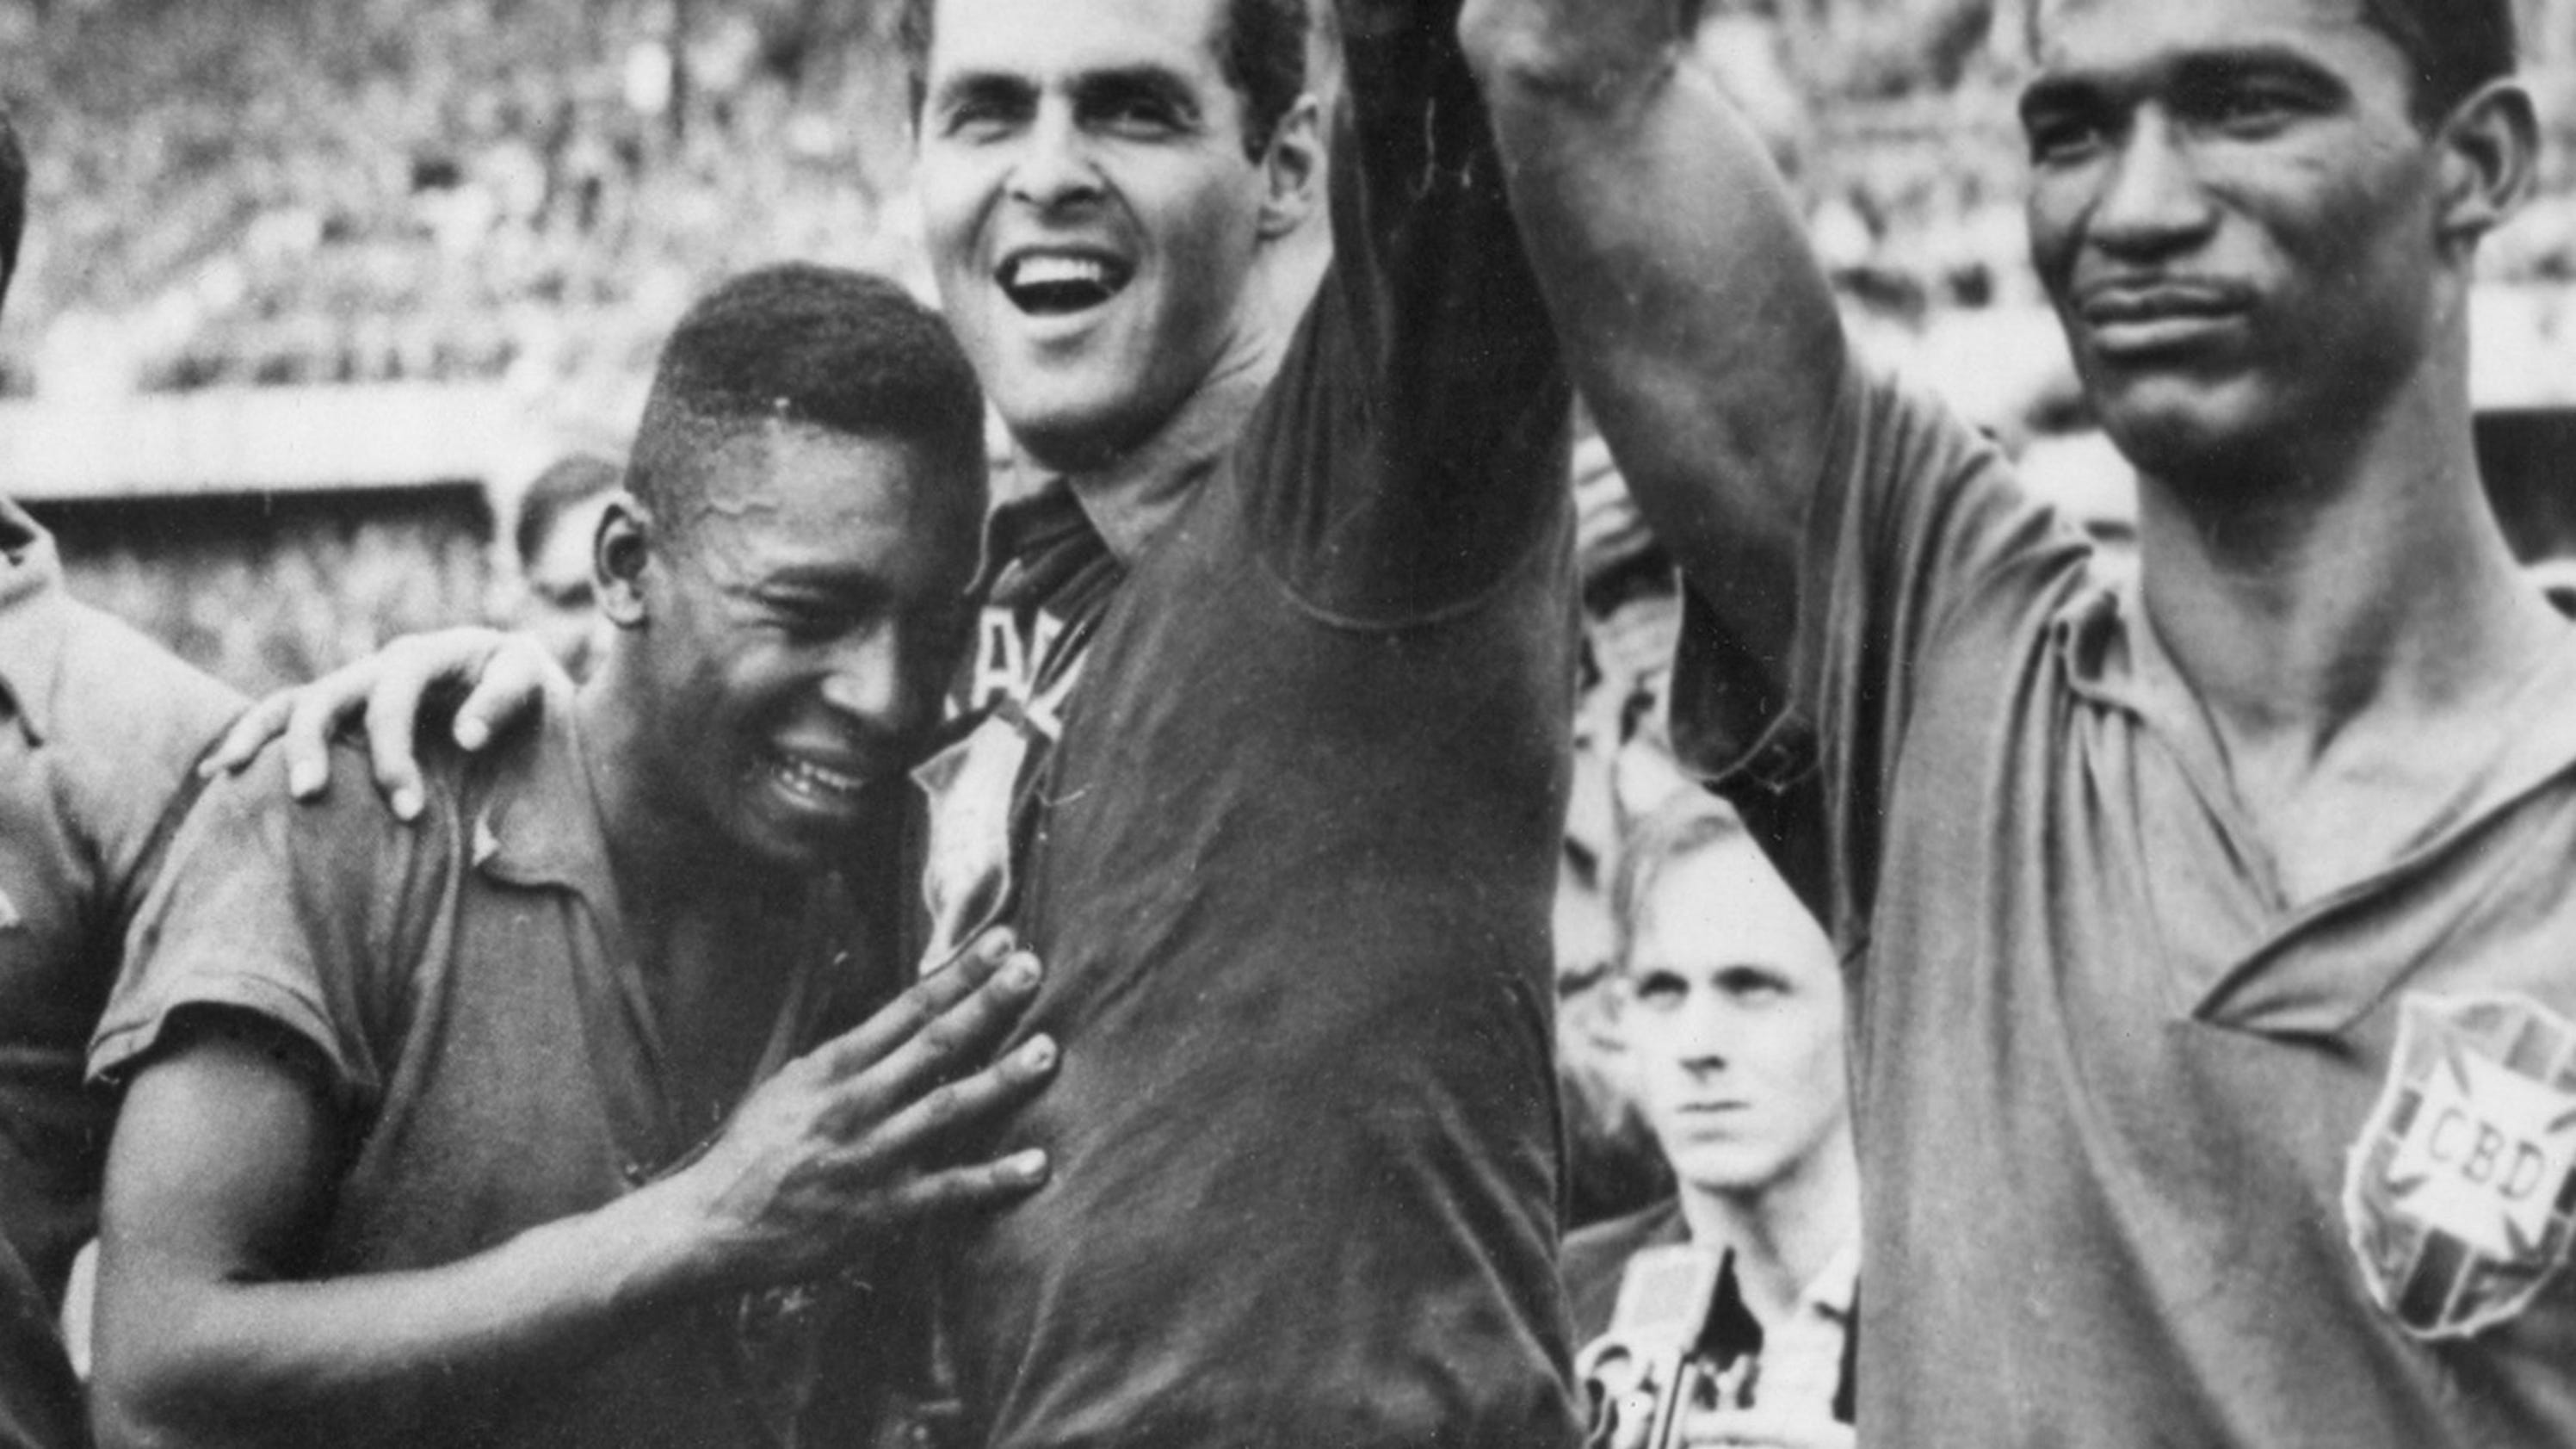 WORLD CUP: Pele comes of age as Brazil wins 1958 World Cup